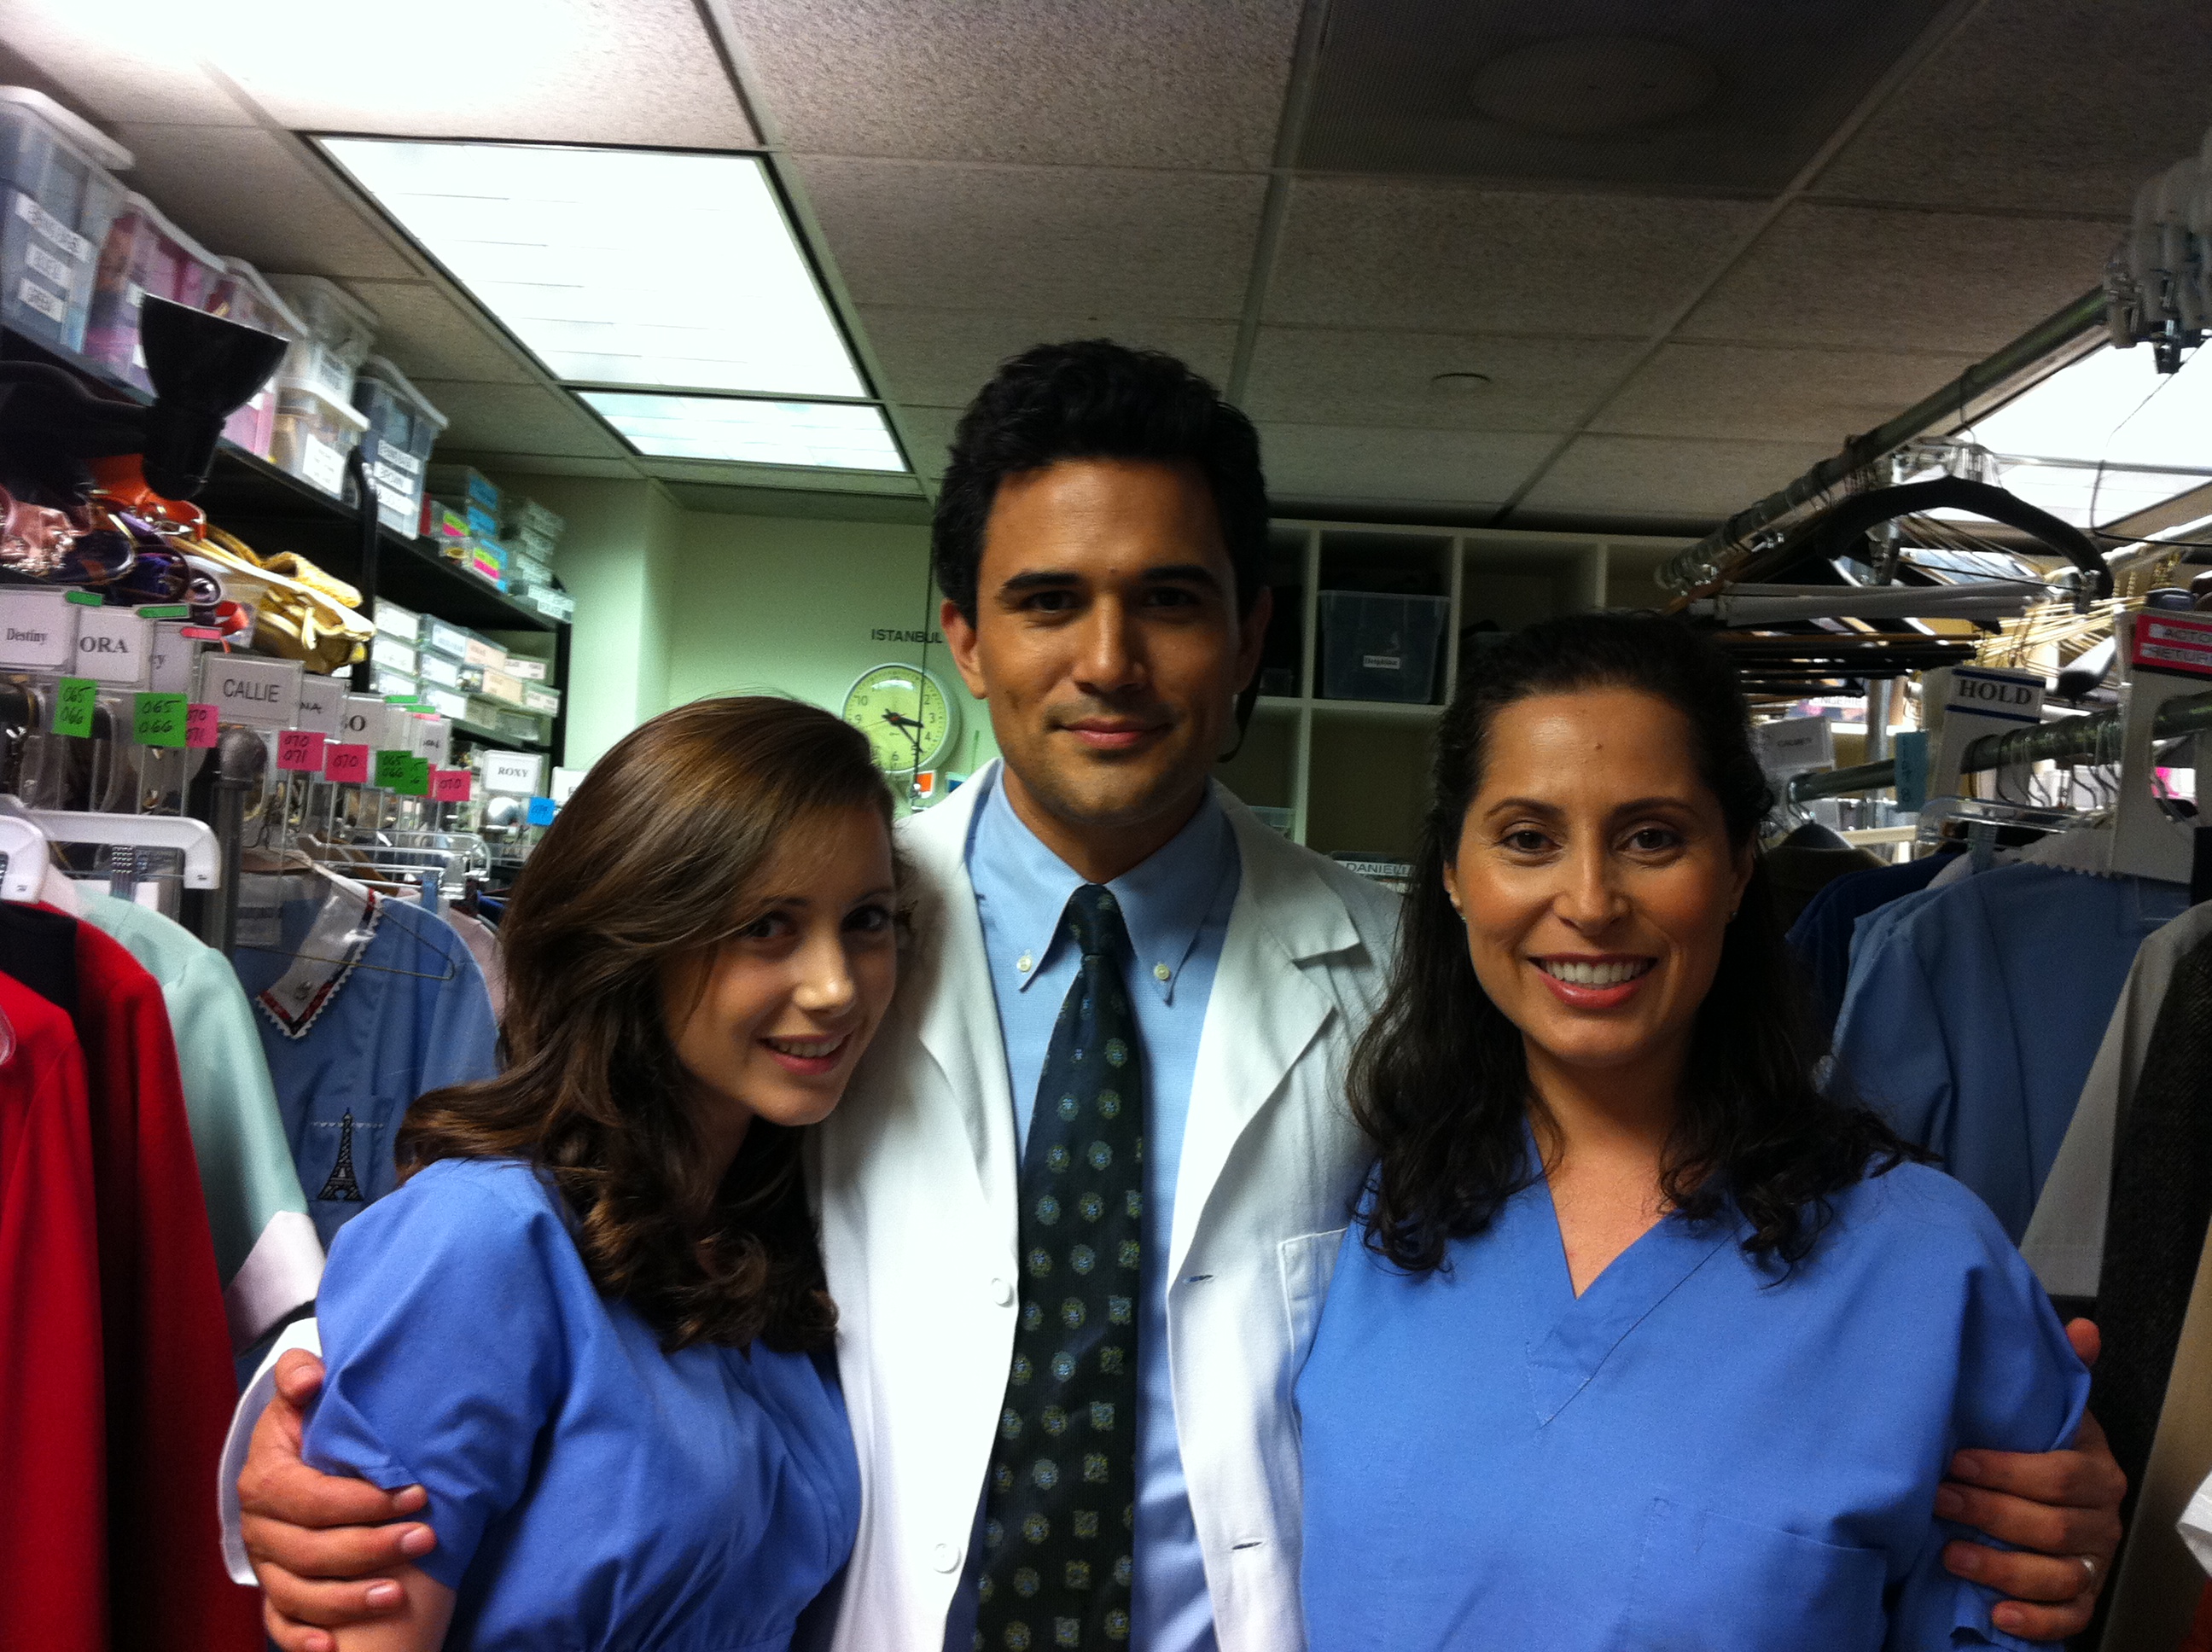 On the set of One Life to Live, November 28, 2011.